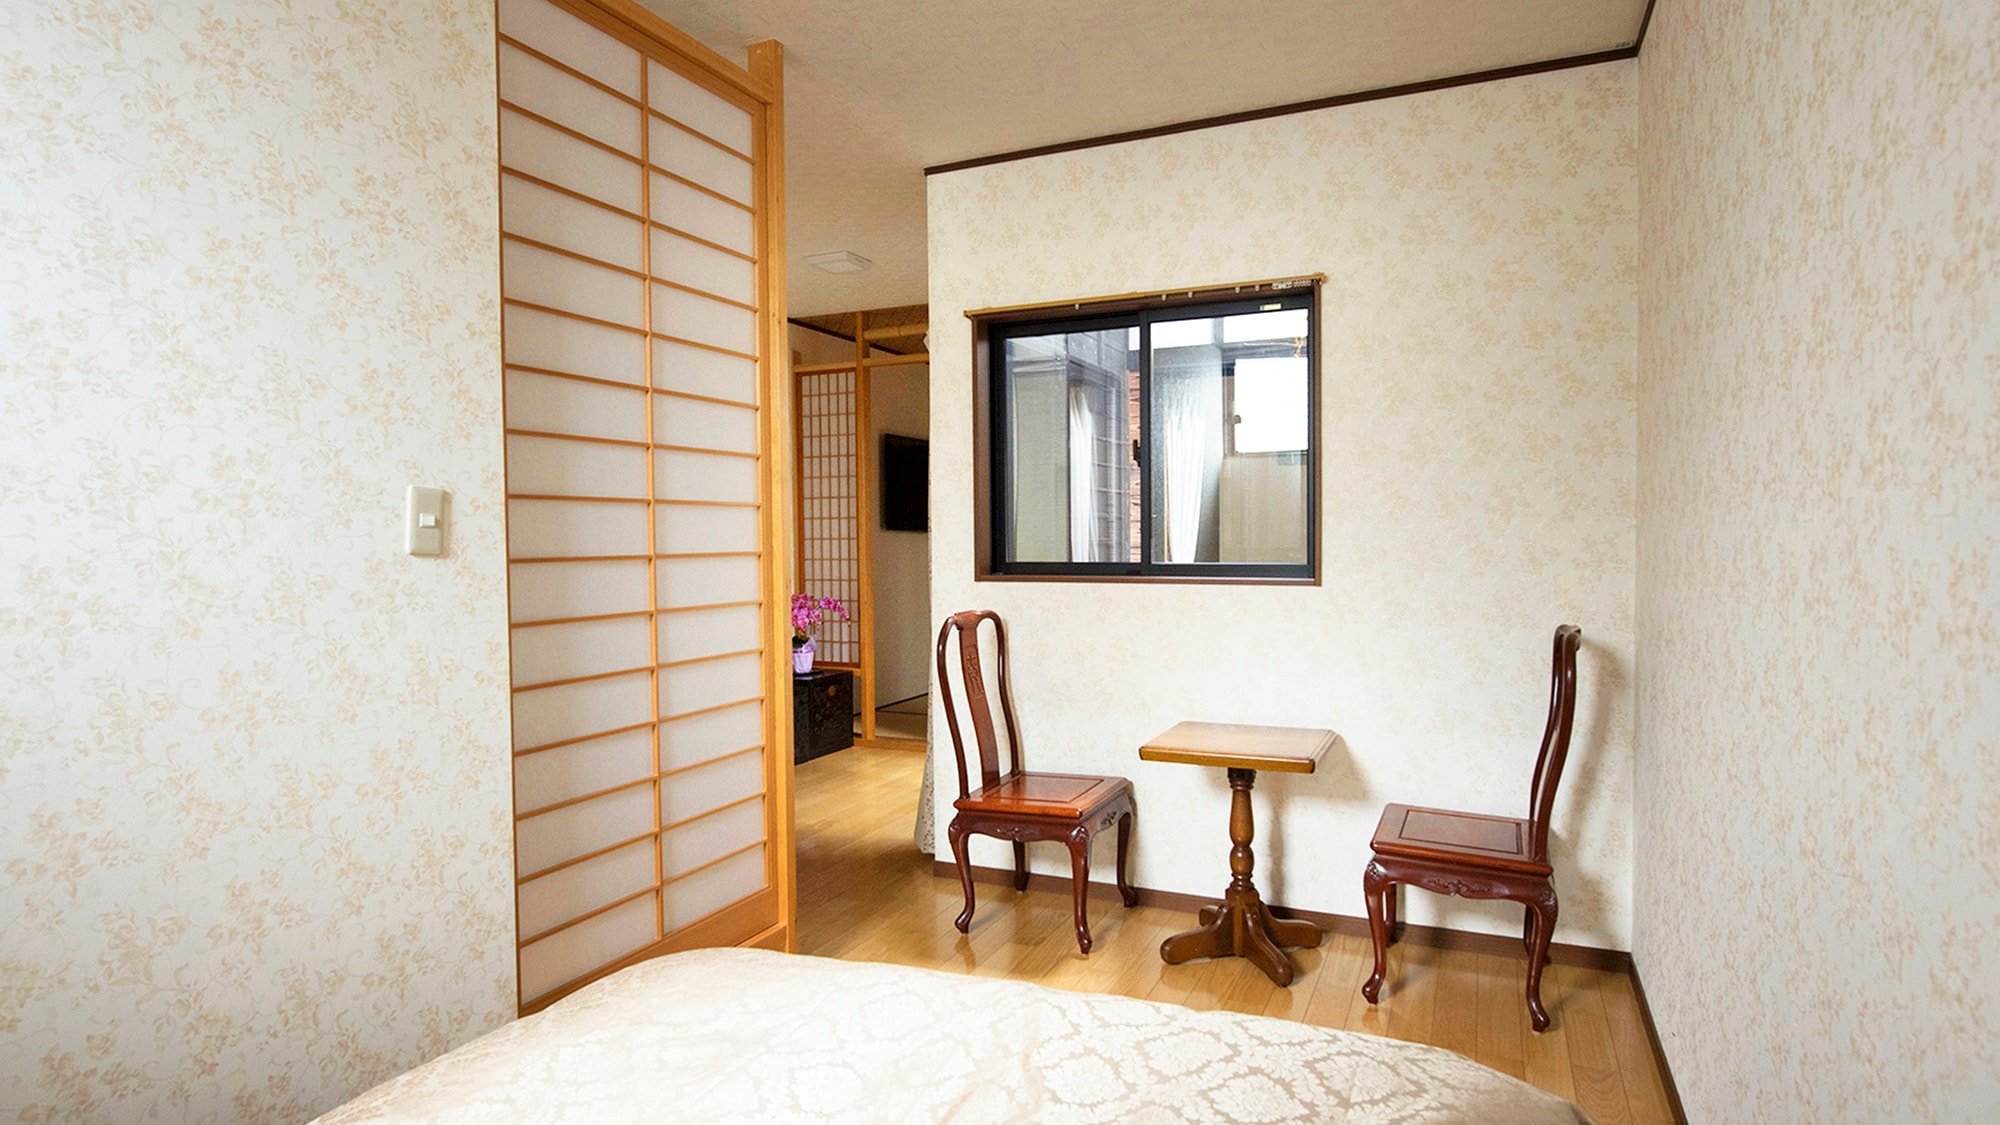 ・ "Sakura" room: Up to 5 people can stay